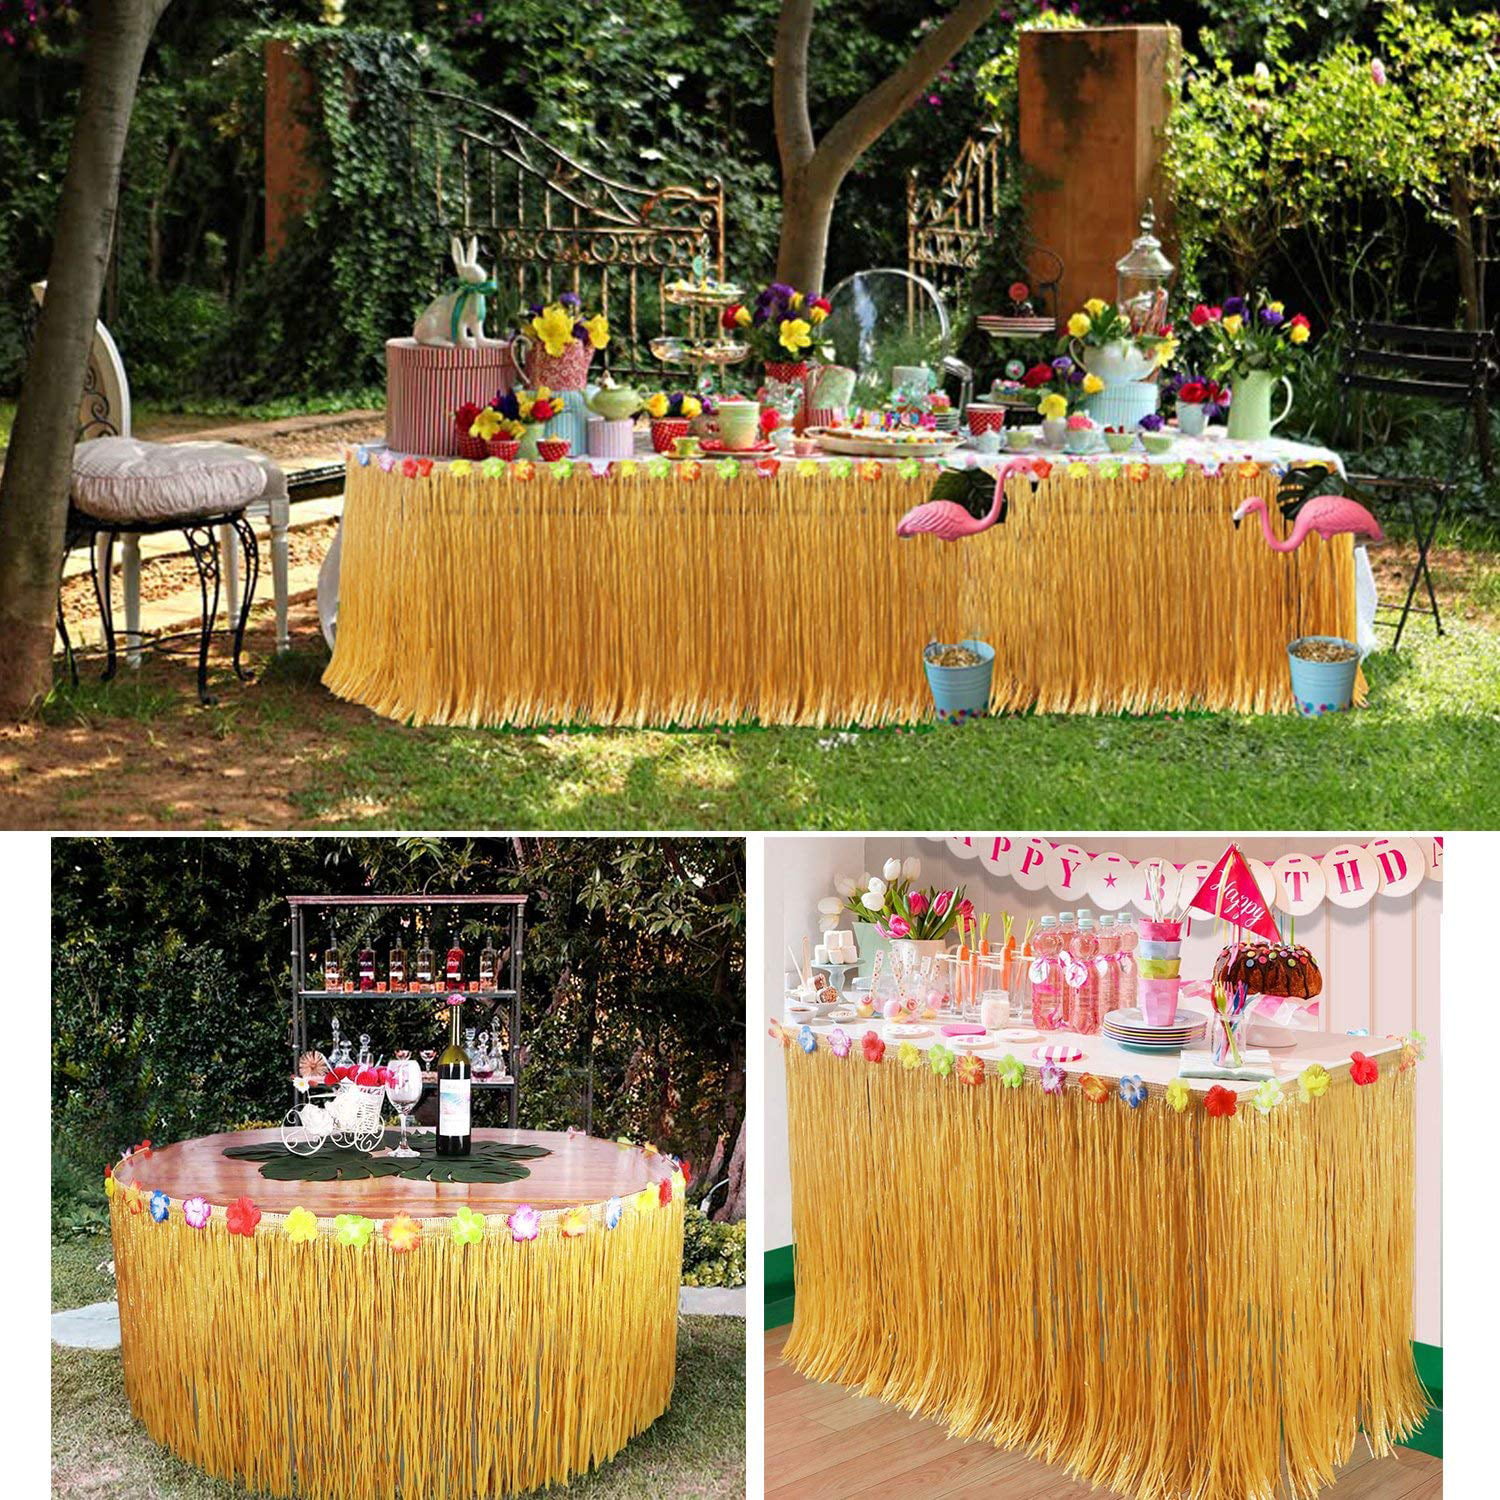 Party Table Skirt Hawaiian Party Decorations BKJJ Hawaiian Style Table Skirt Hawaiian Hibiscus Grass Table Skirt with 30 Faux Silk Flowers for BBQ Tropical Garden Beach Summer Party Decorations